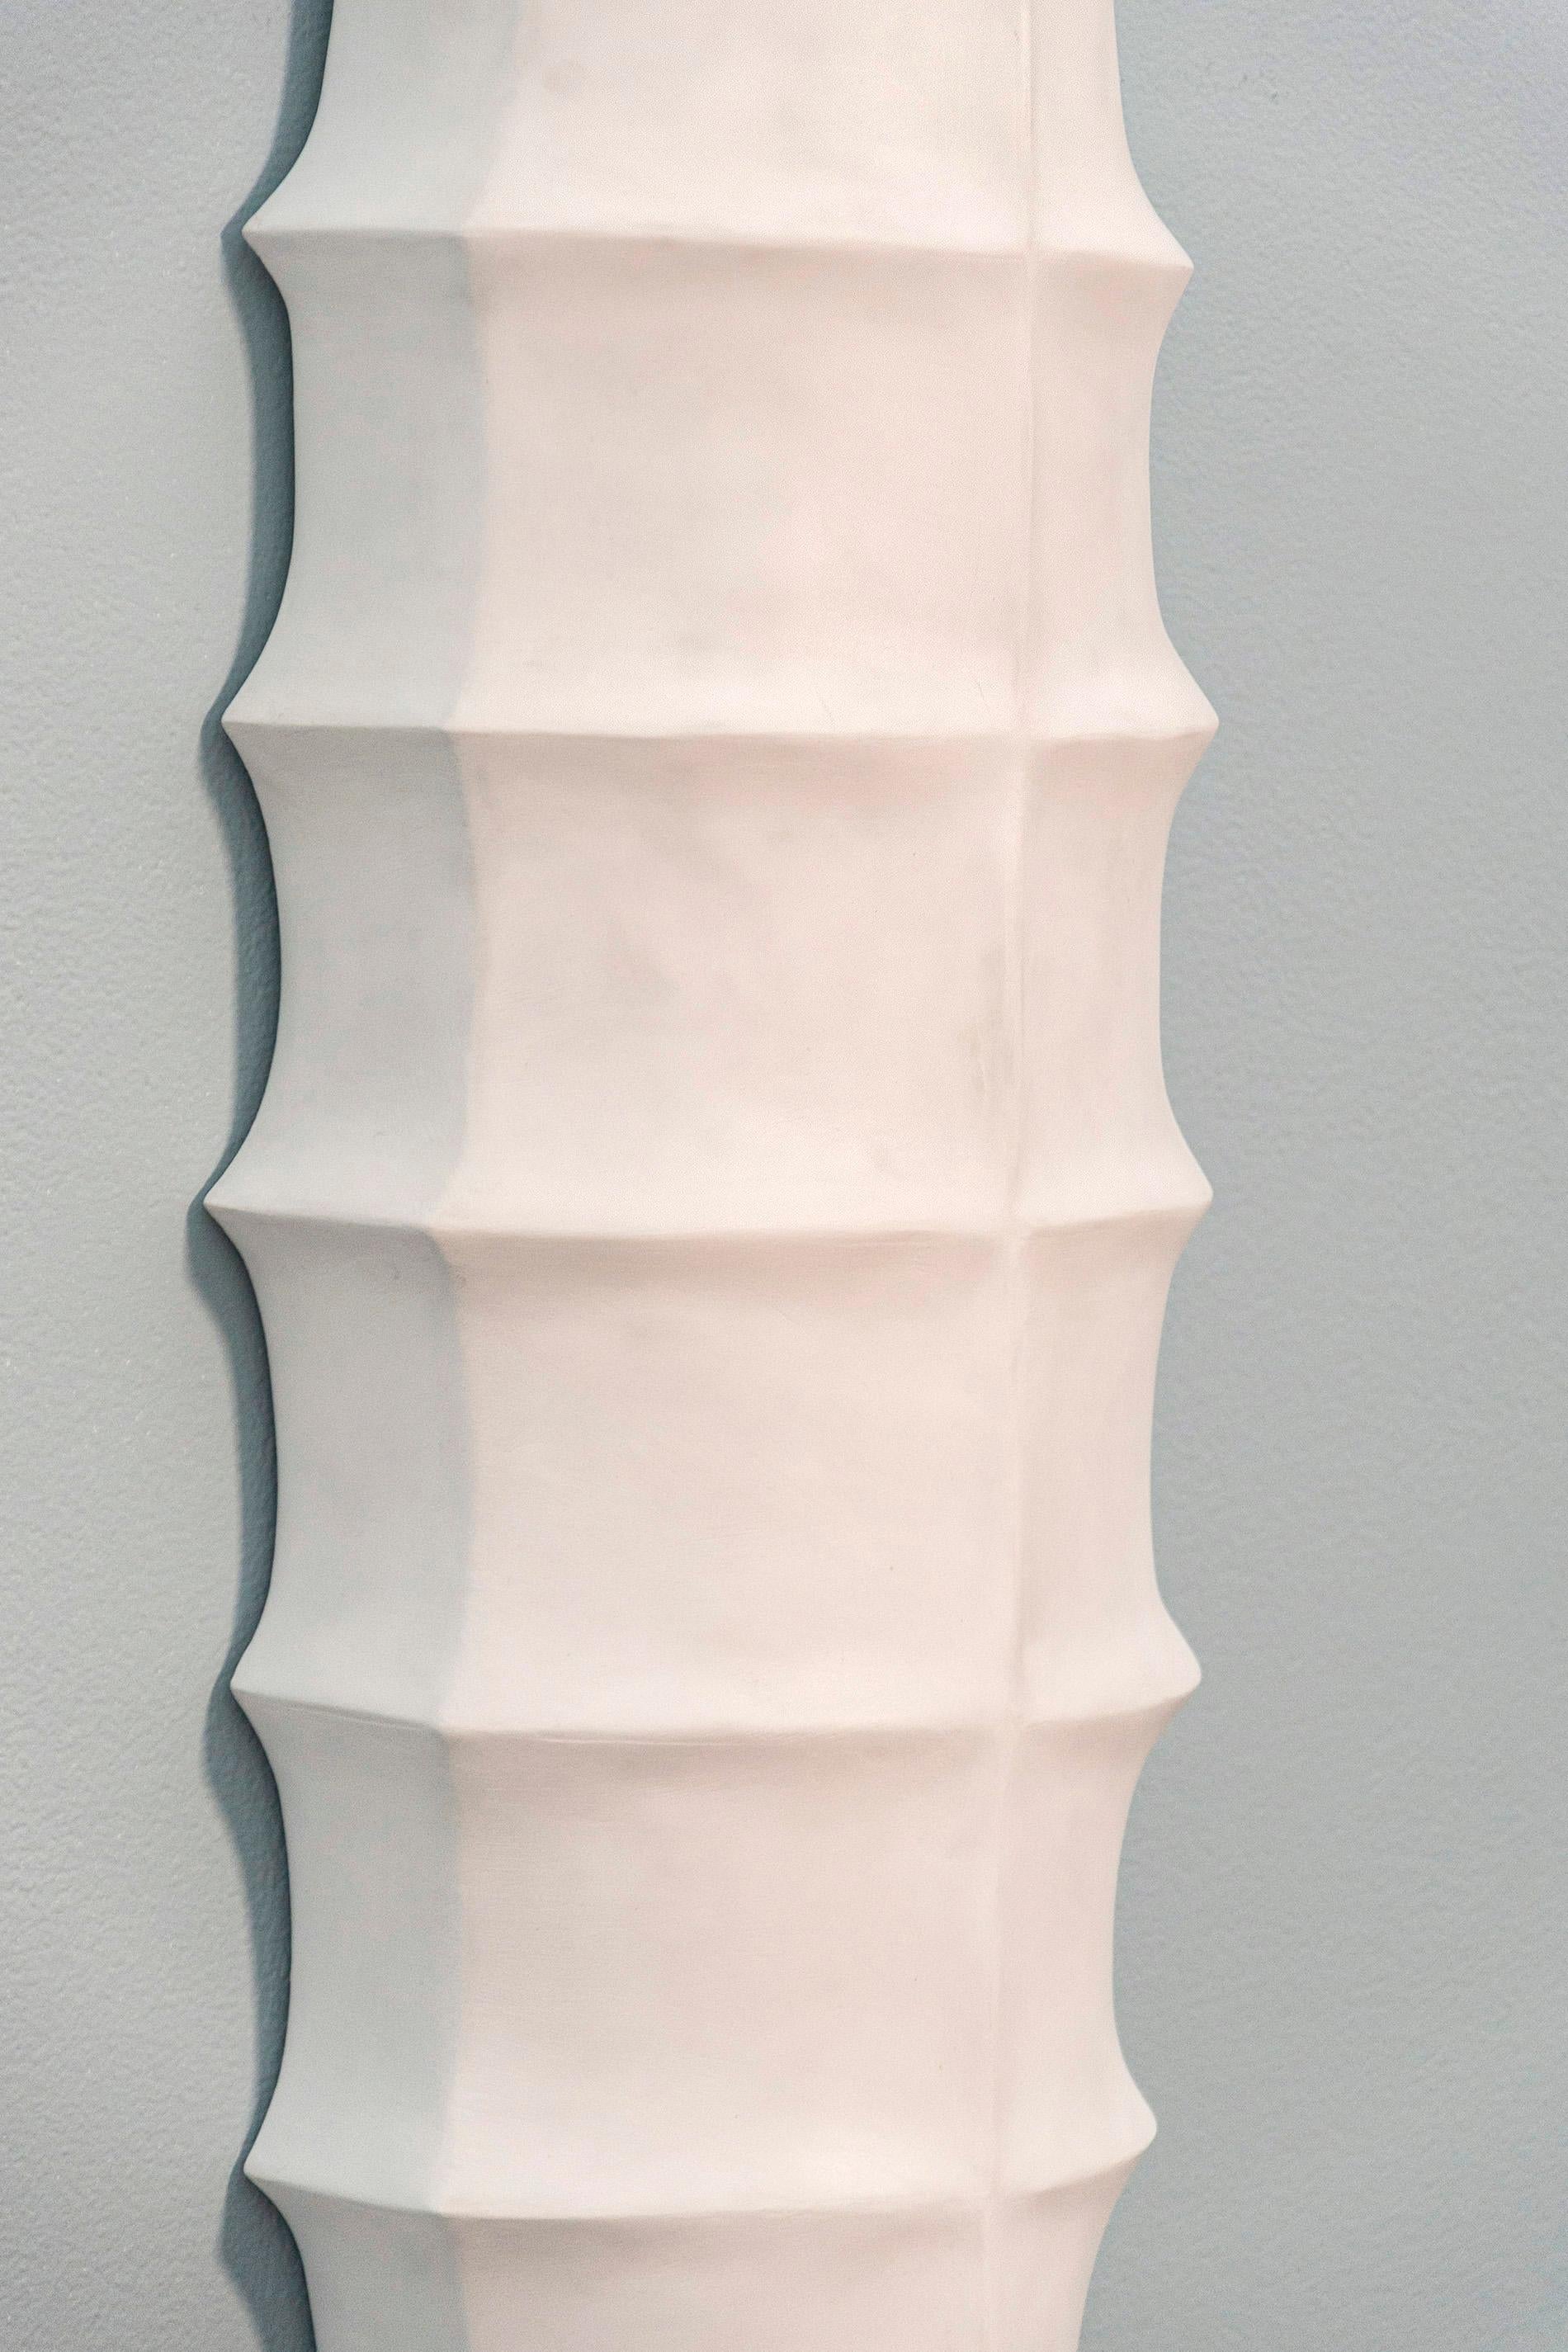 Inspired by the organic shapes, colours and textures of the natural world, Jana Osterman creates stunning wall reliefs. This bright white plaster piece features an elegant, elongated shape and raised ridges. A wax polish on the plaster gives it a